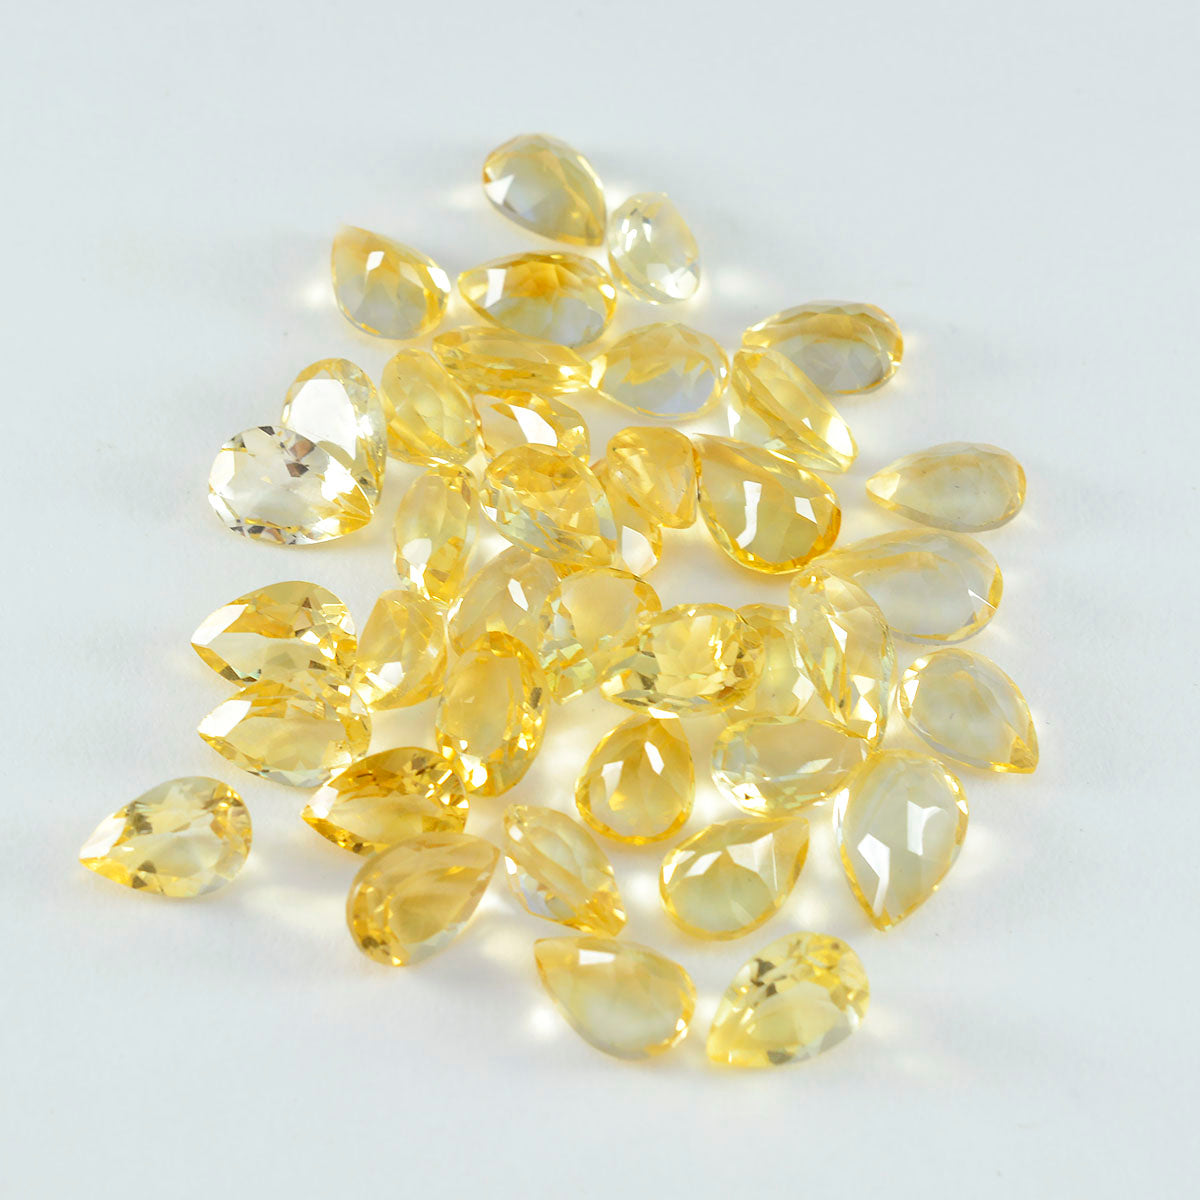 Riyogems 1PC Real Yellow Citrine Faceted 5x7 mm Pear Shape handsome Quality Loose Gemstone